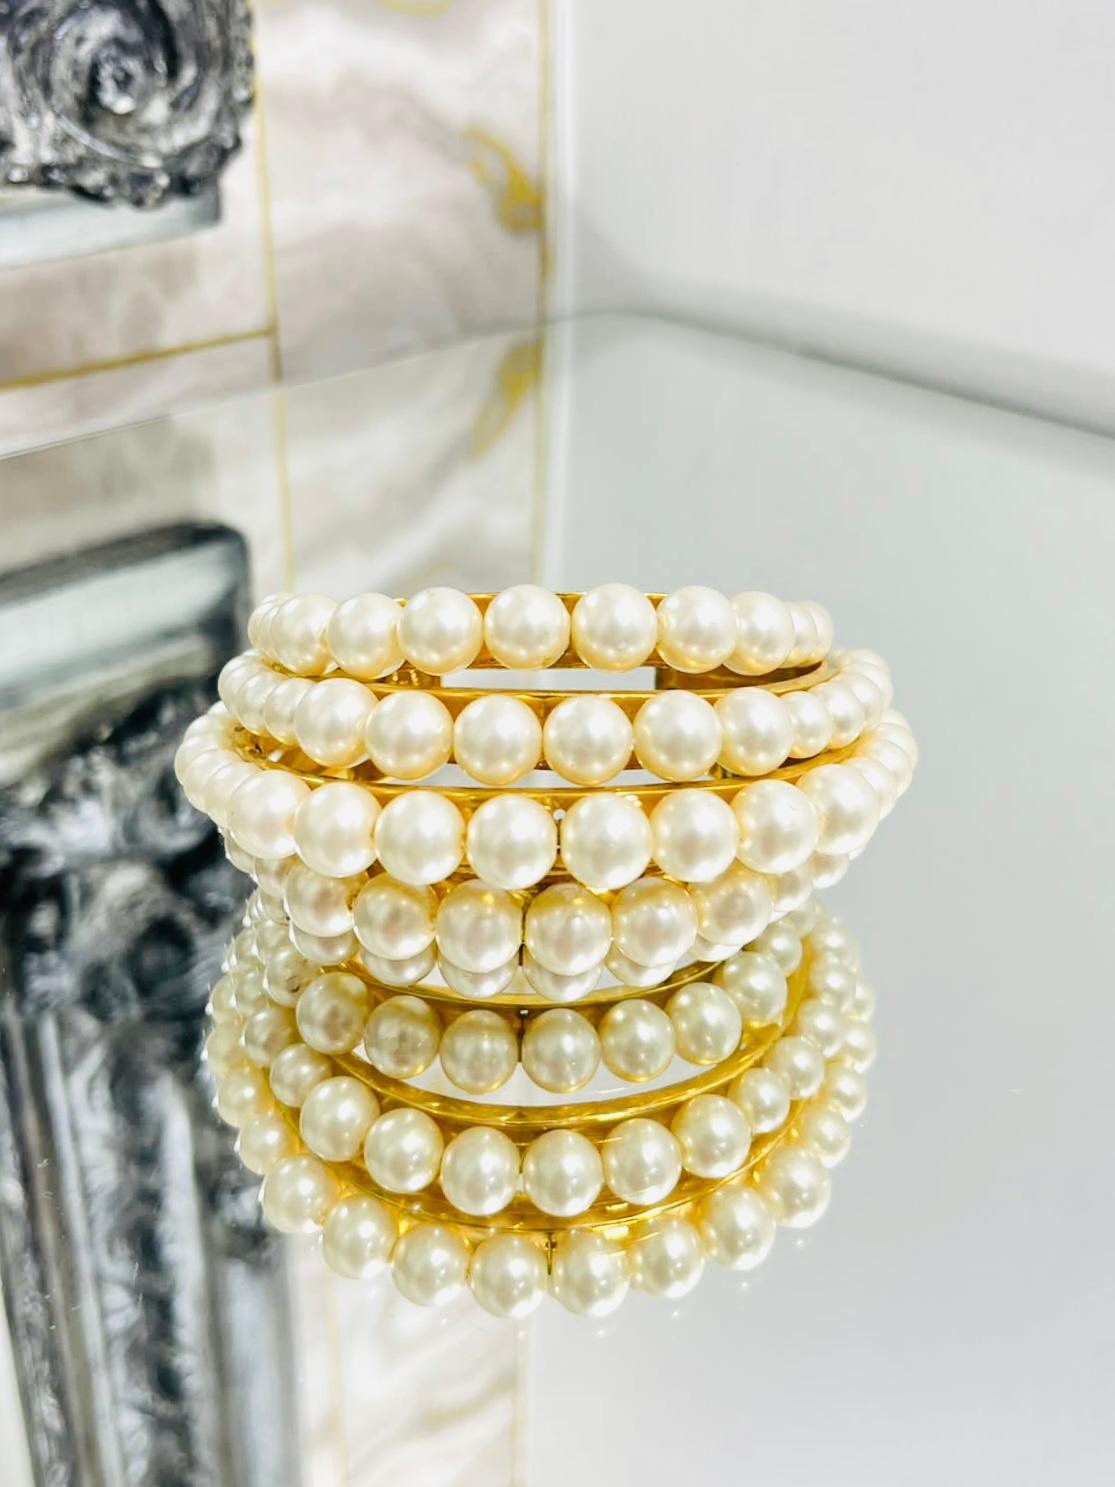 Victoire de Castellane for Chanel Multi Tier Cuff

Rare five row faux pearl cuff set in heavy gold plated open 

cuff bracelet. From 1984 collection.

Size - One Size 

Condition - Vintage - Very Good

Composition - Gold Plating, Metal, Fux